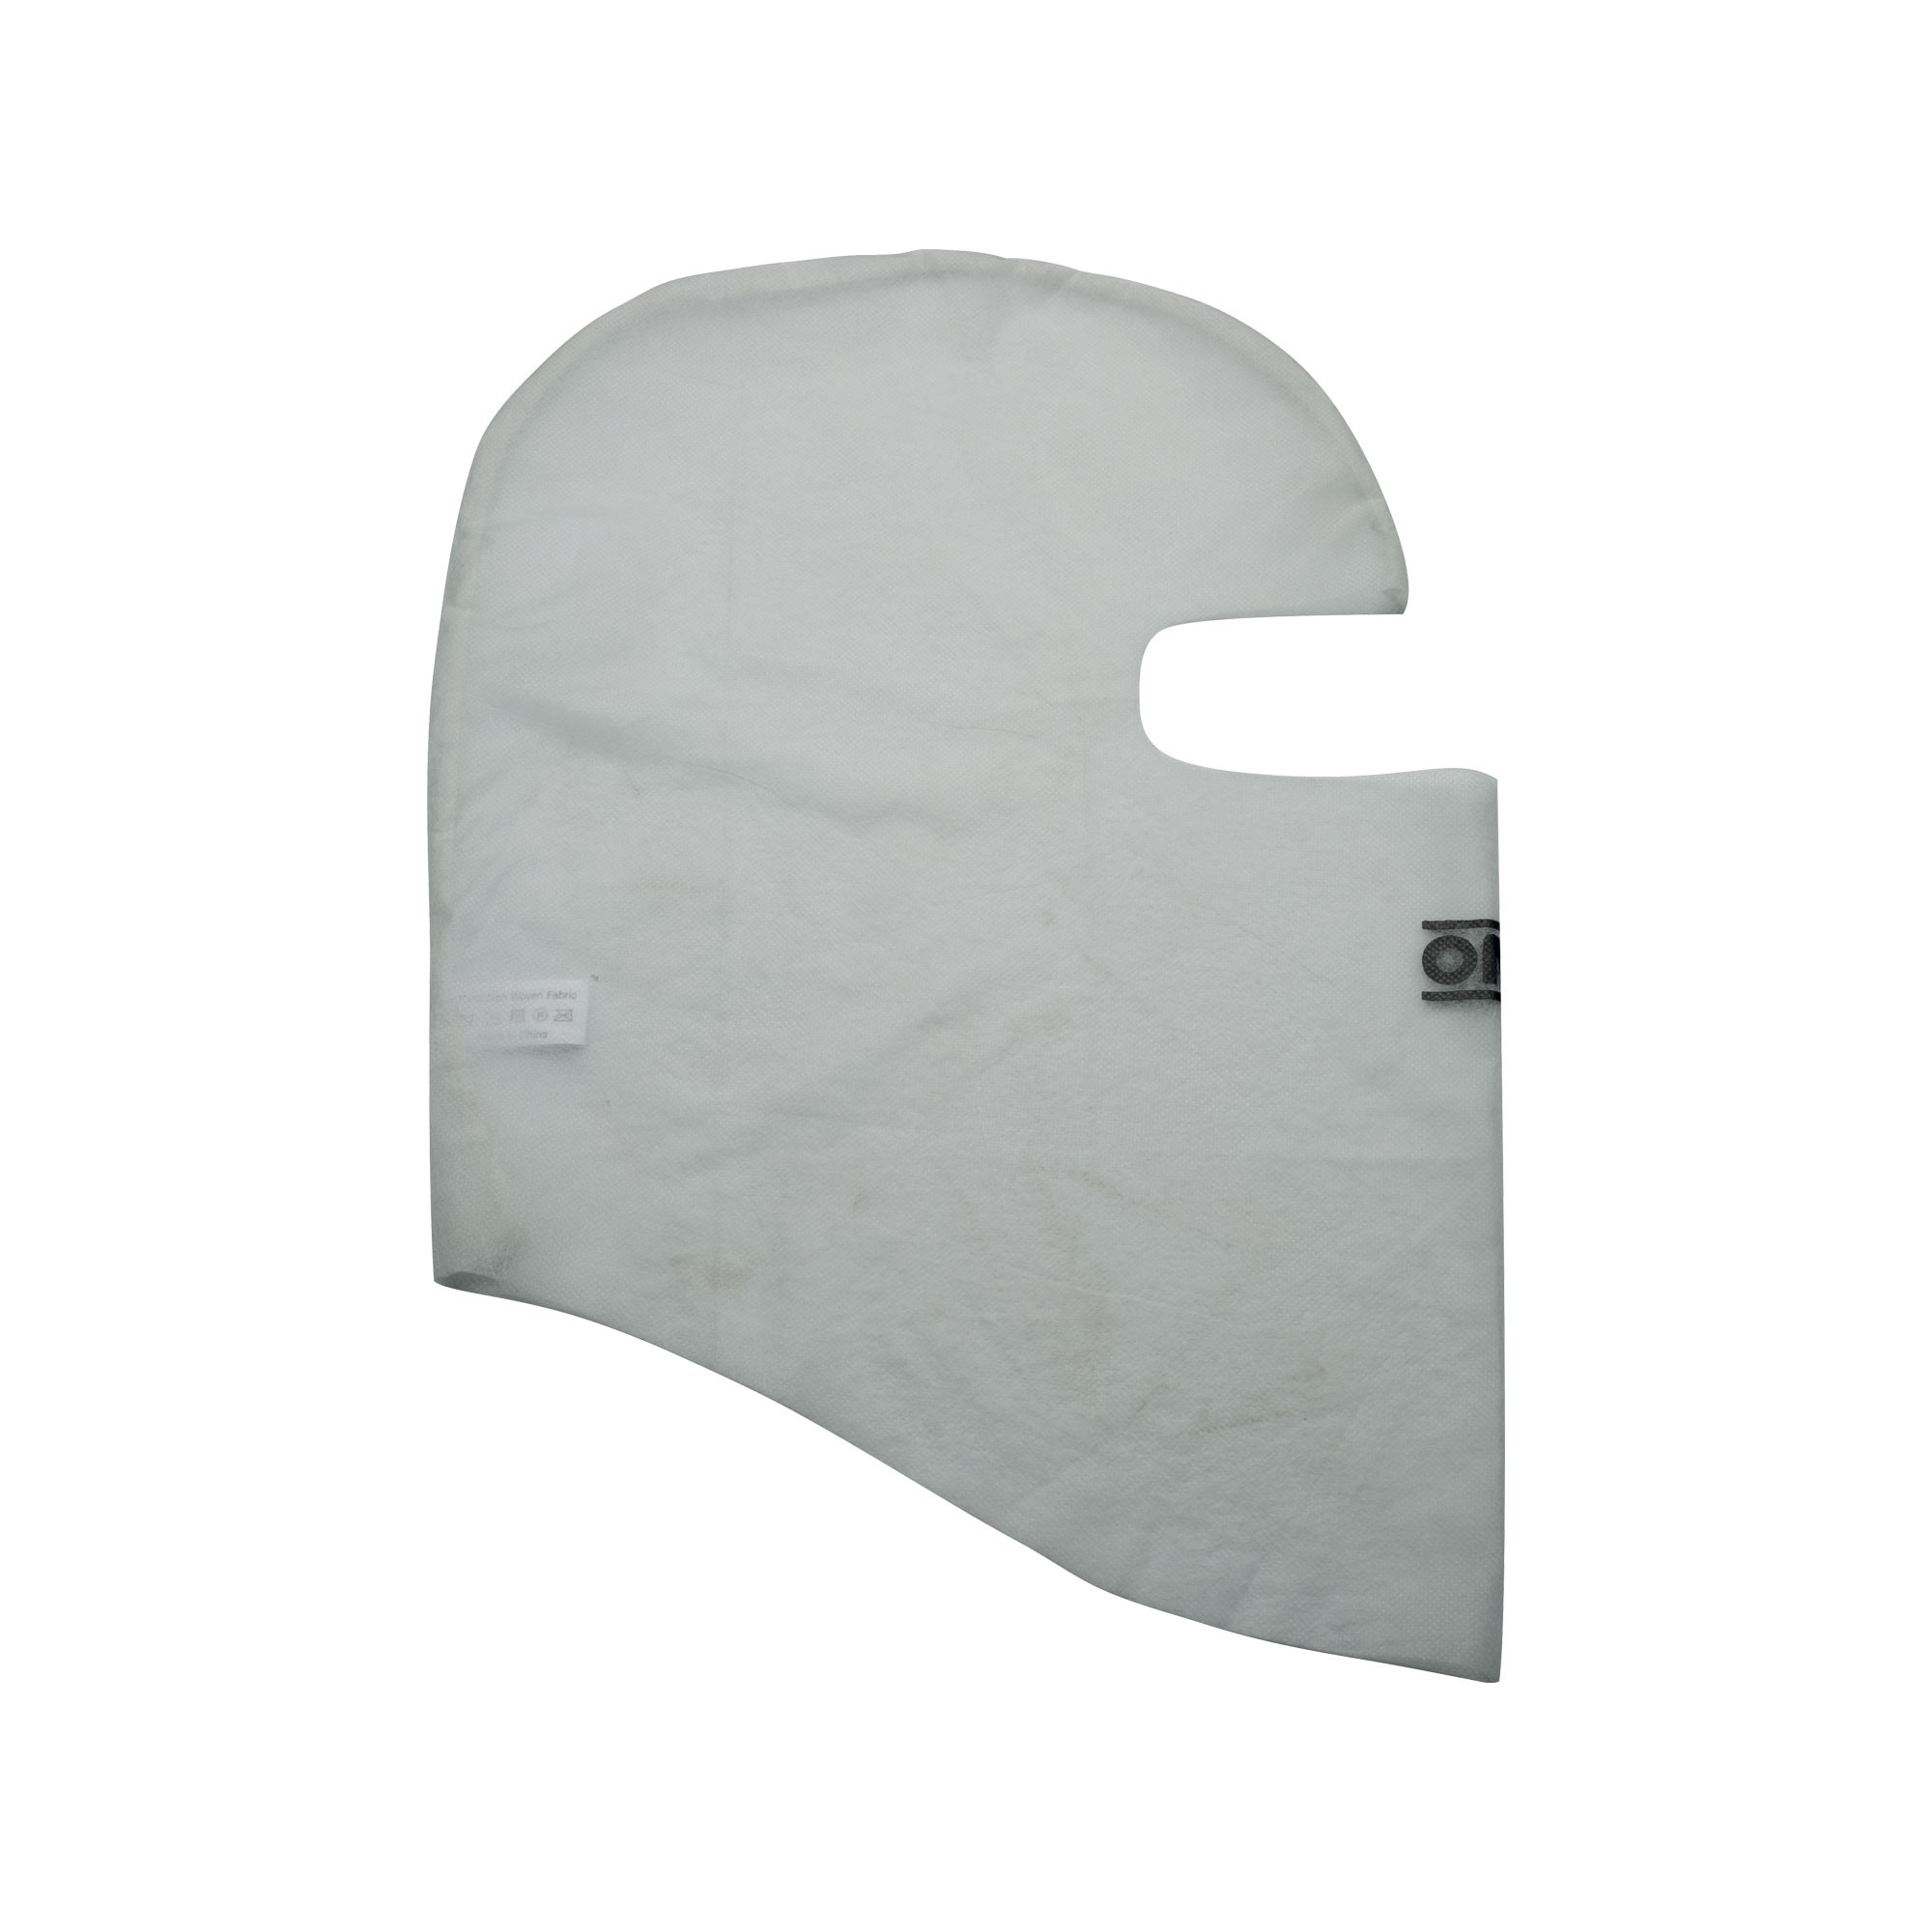 BALACLAVA WHITE ONE SIZE TISSUE TNT BAGS 25 PIECES